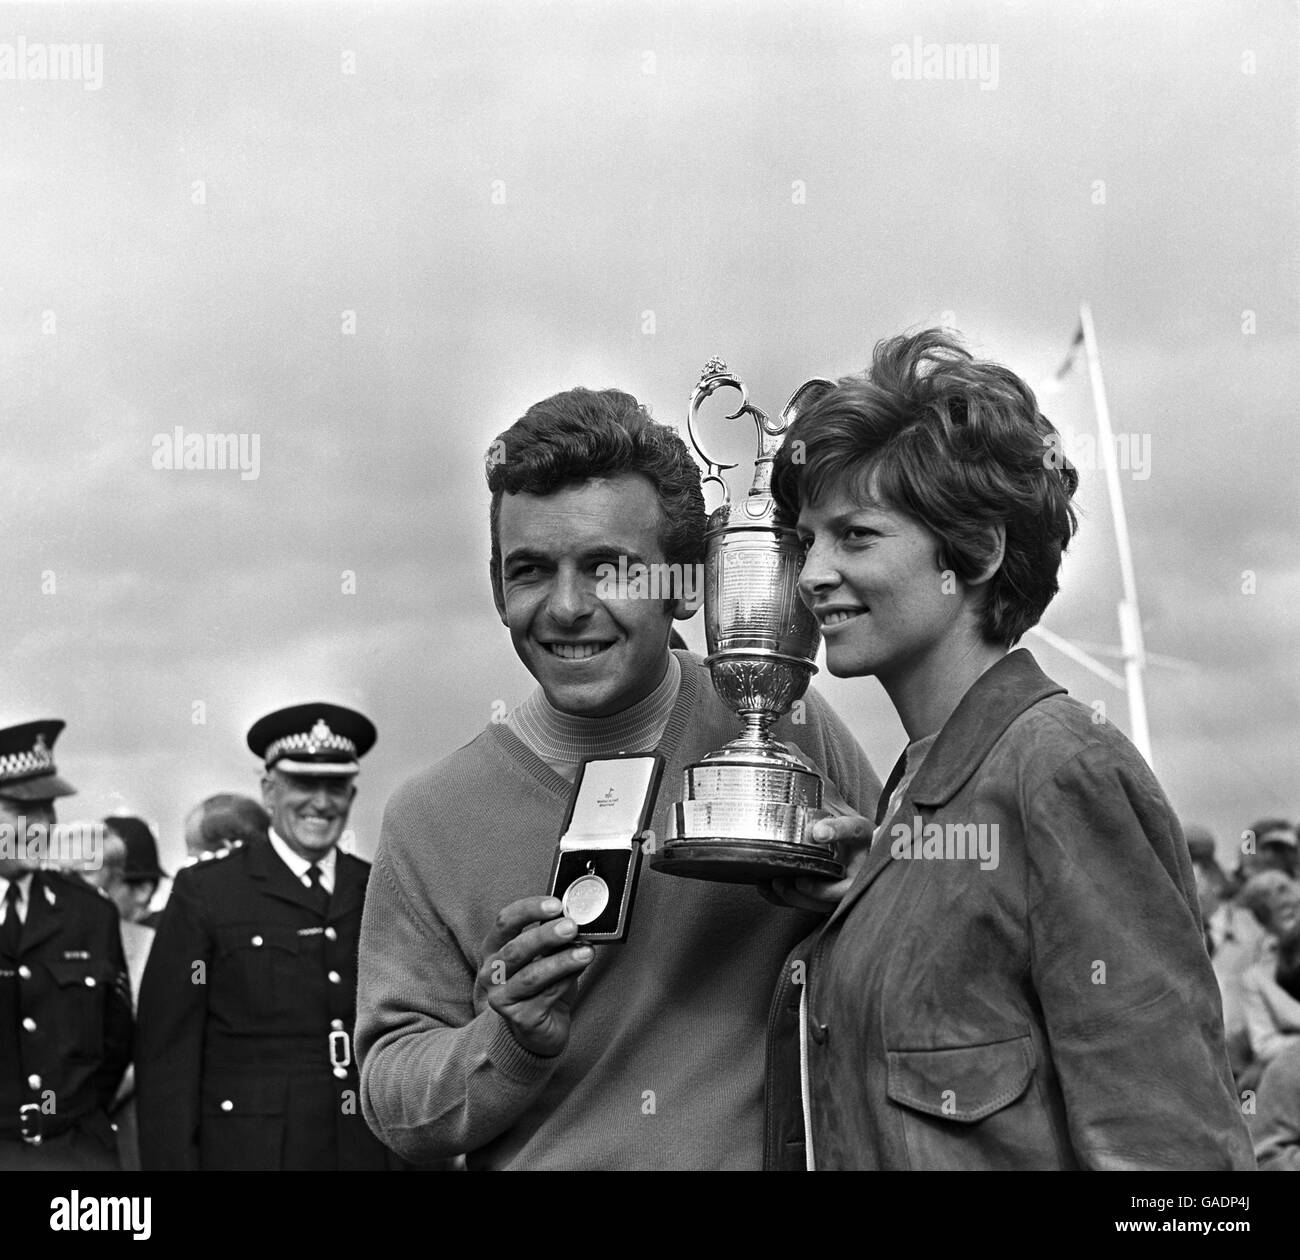 Golf - The Open Championship - Lytham St Annes. England's Tony Jacklin and his wife, Vivien, pose with his trophy after winnig the tournament Stock Photo